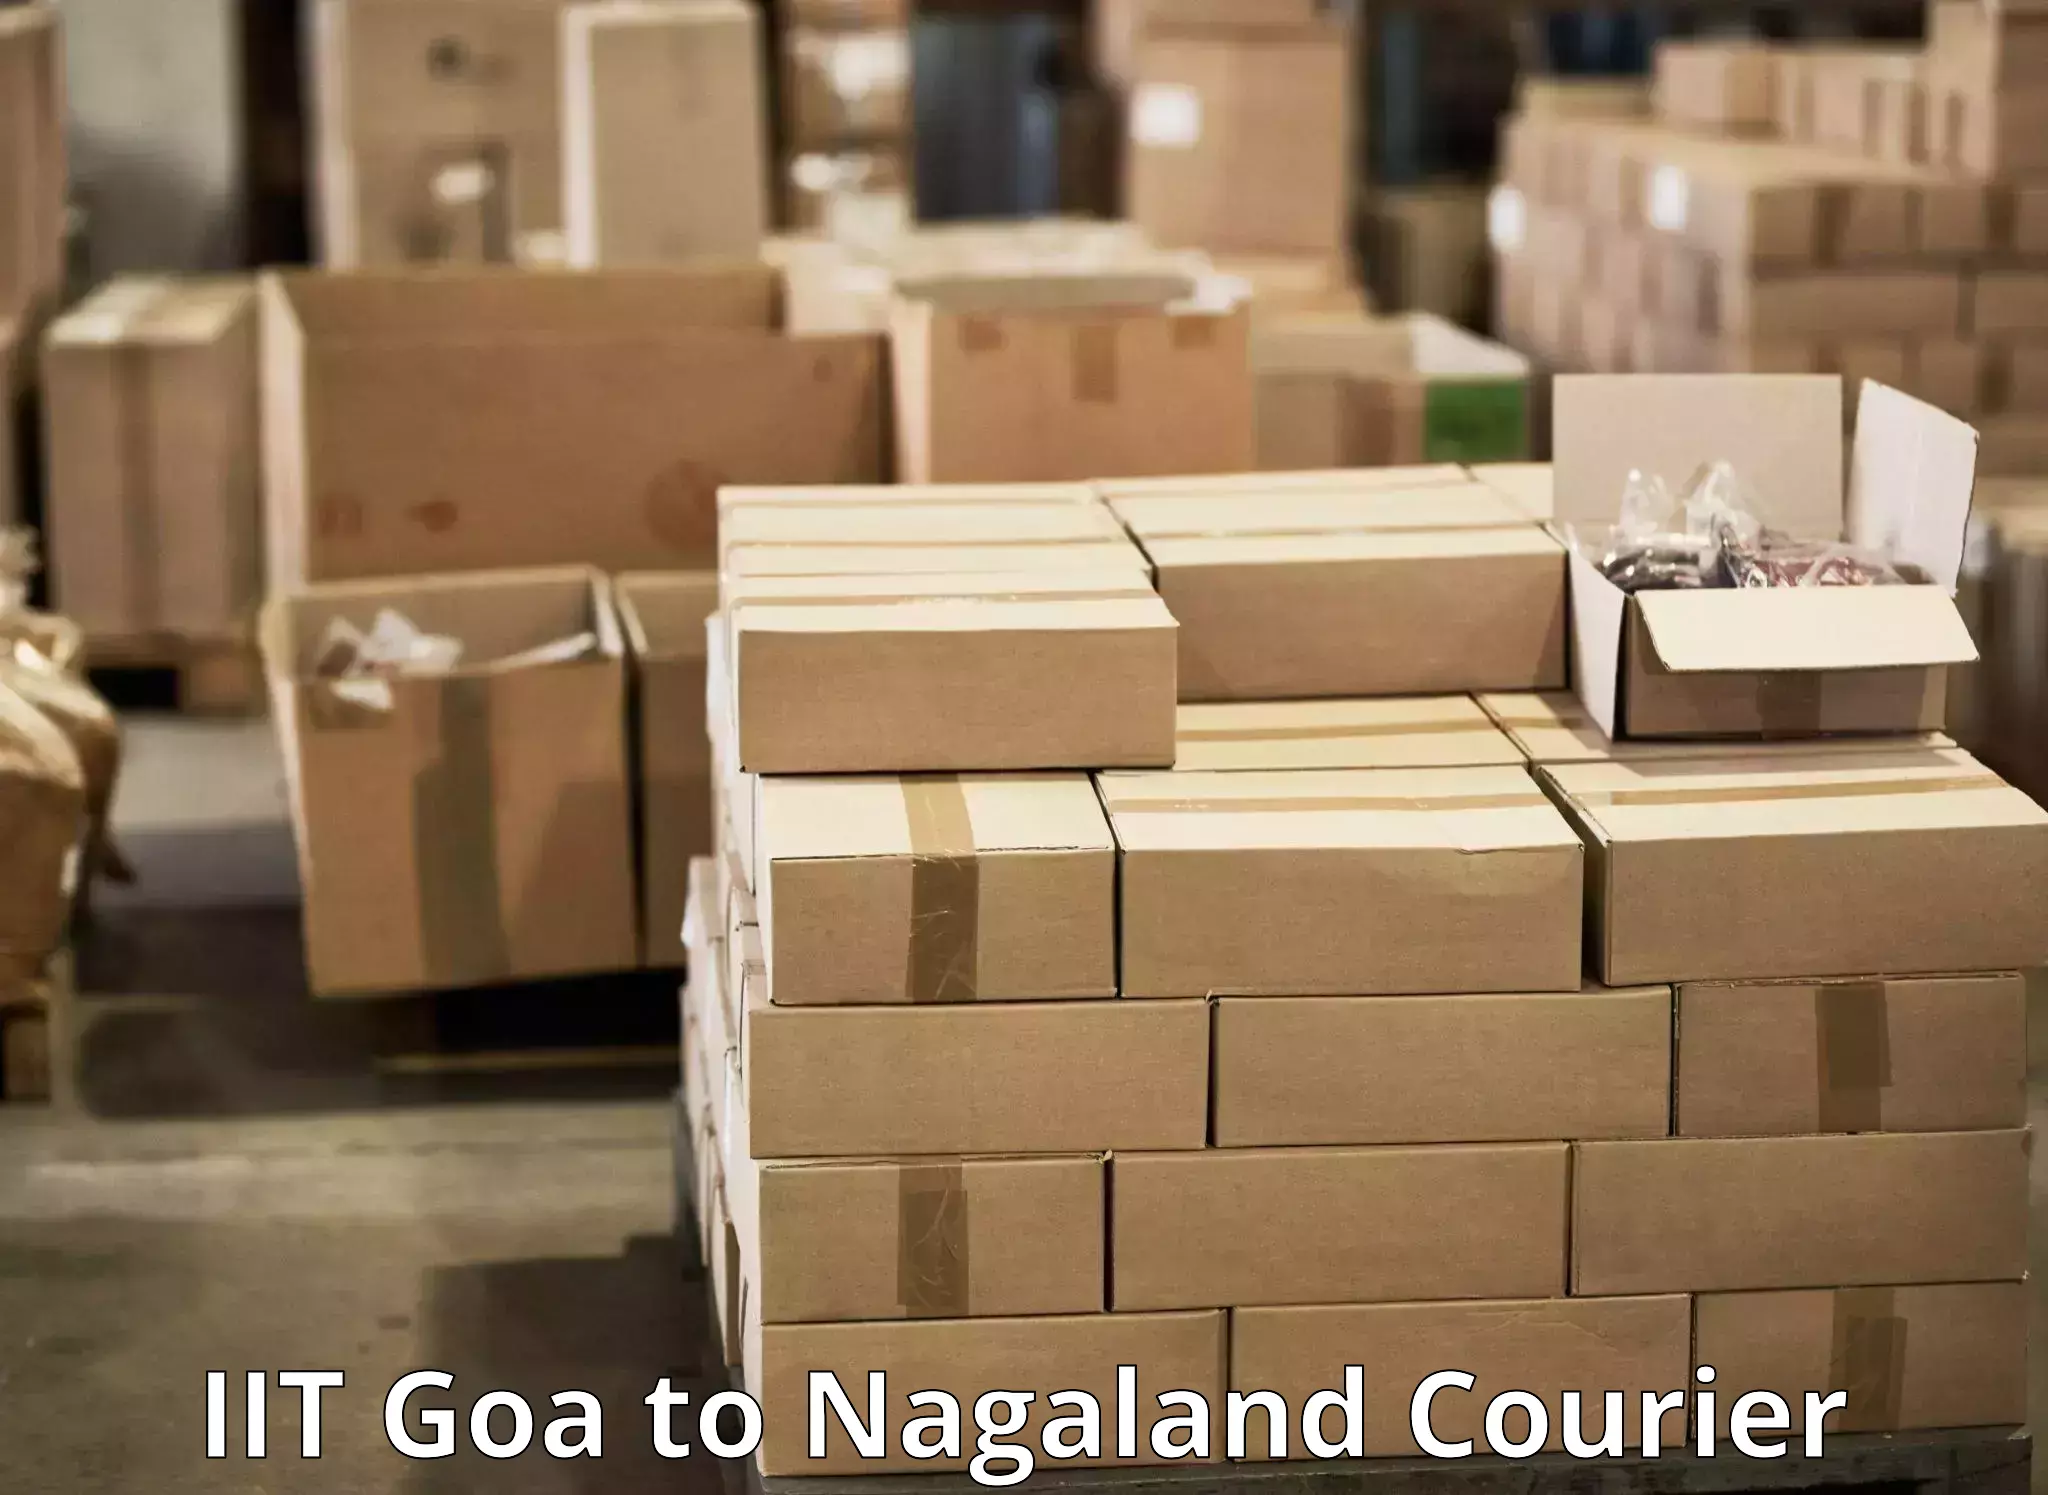 Nationwide parcel services IIT Goa to NIT Nagaland